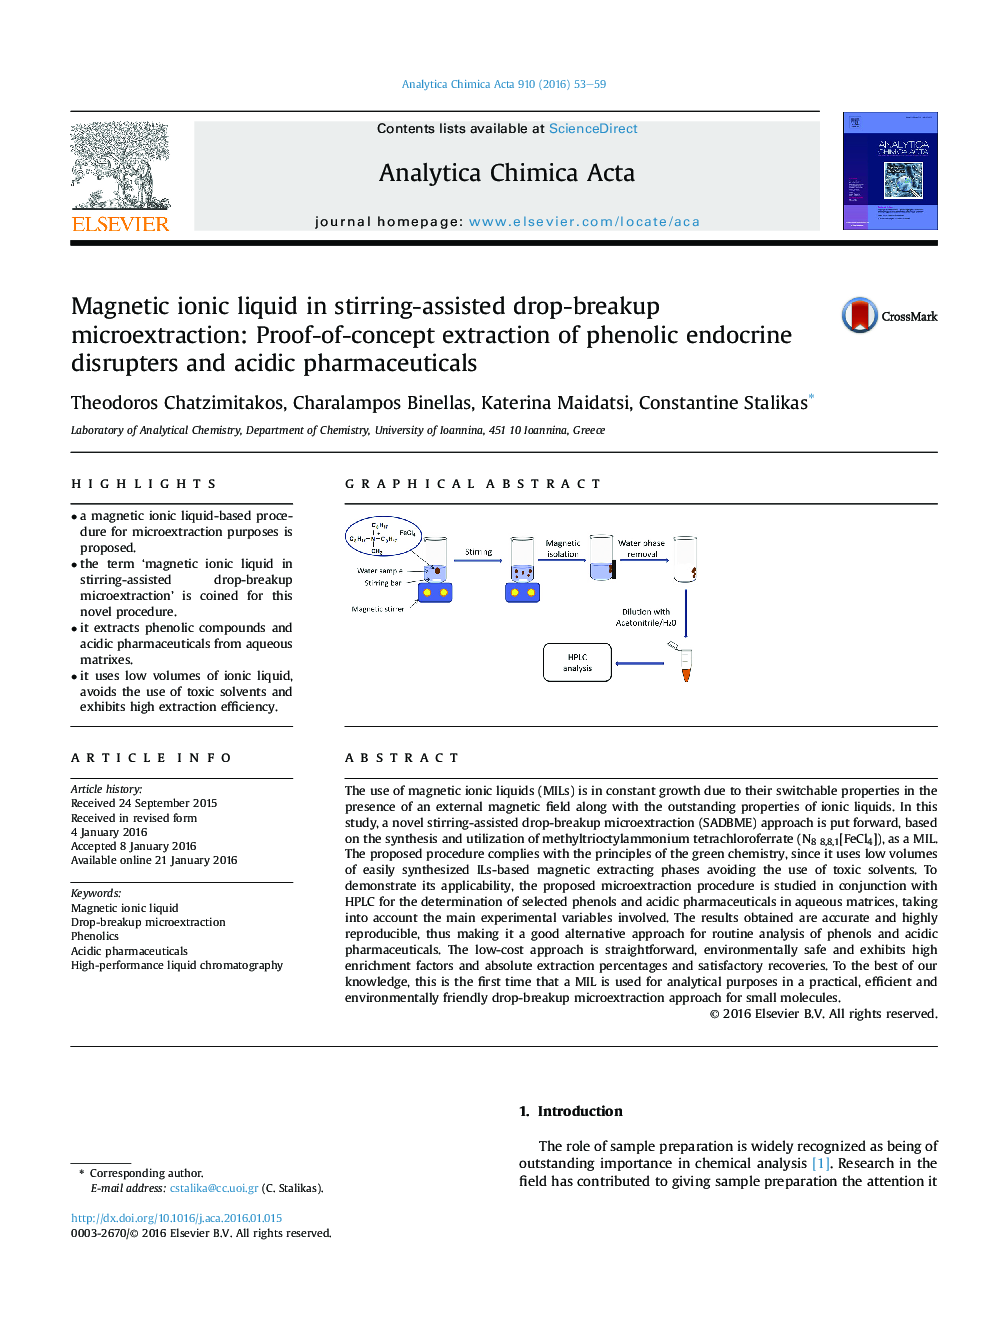 Magnetic ionic liquid in stirring-assisted drop-breakup microextraction: Proof-of-concept extraction of phenolic endocrine disrupters and acidic pharmaceuticals